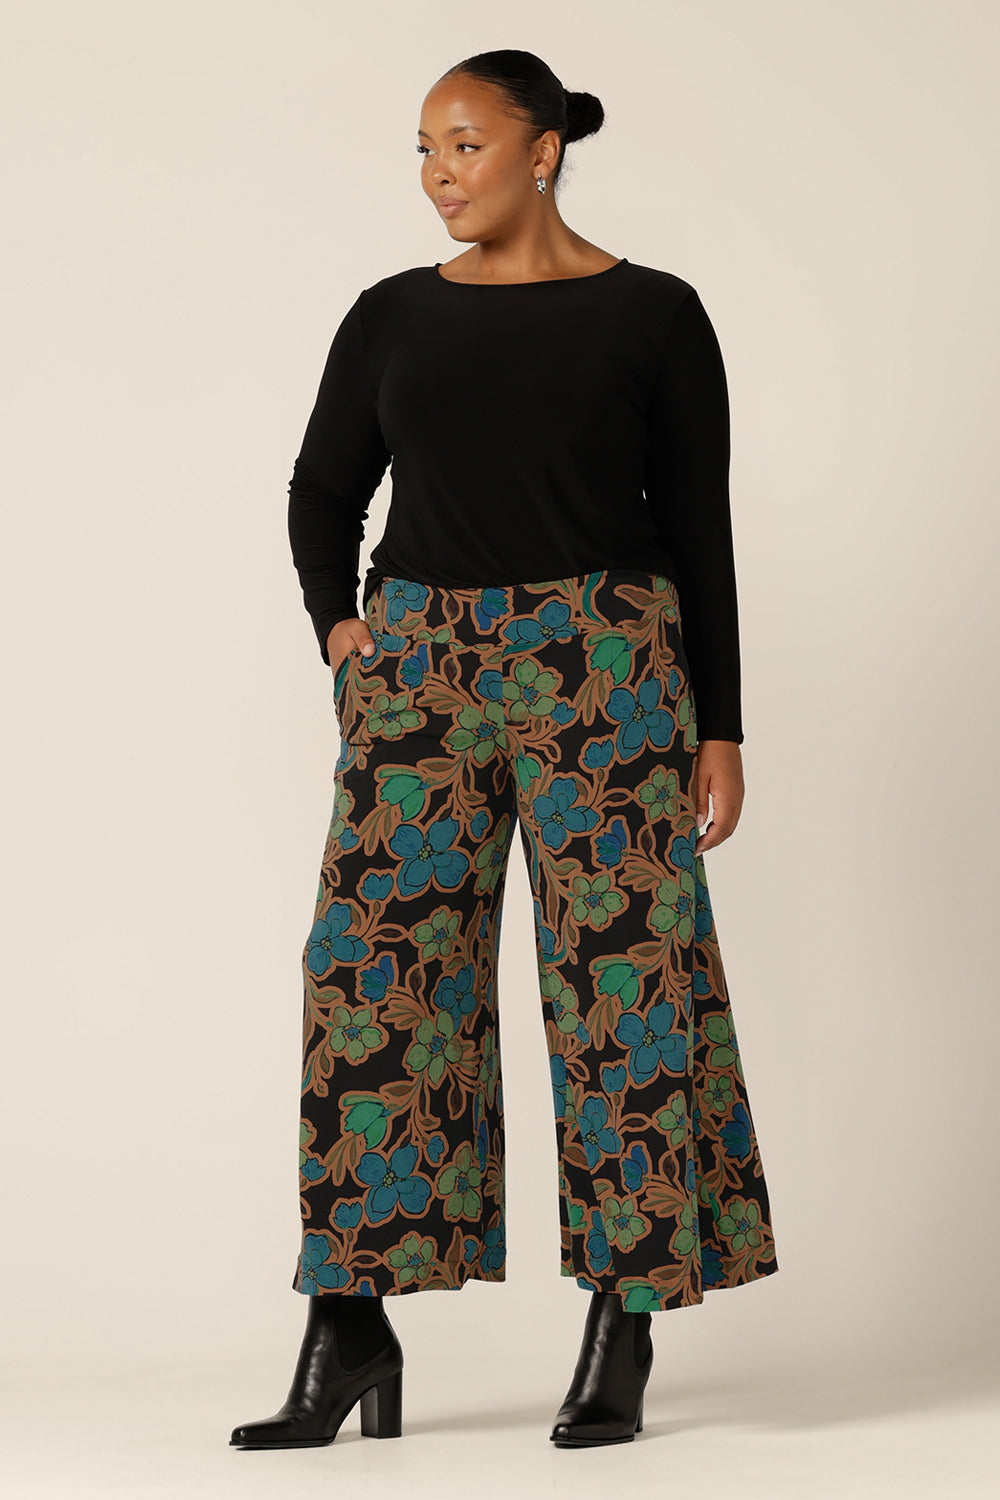 A women's, long sleeve, boat neck top in black jersey worn with wide-leg printed pants. Made in Australia by Australian and New Zealand women's clothing brand, L&F, this is a comfortable workwear top for women in petite to plus sizes.